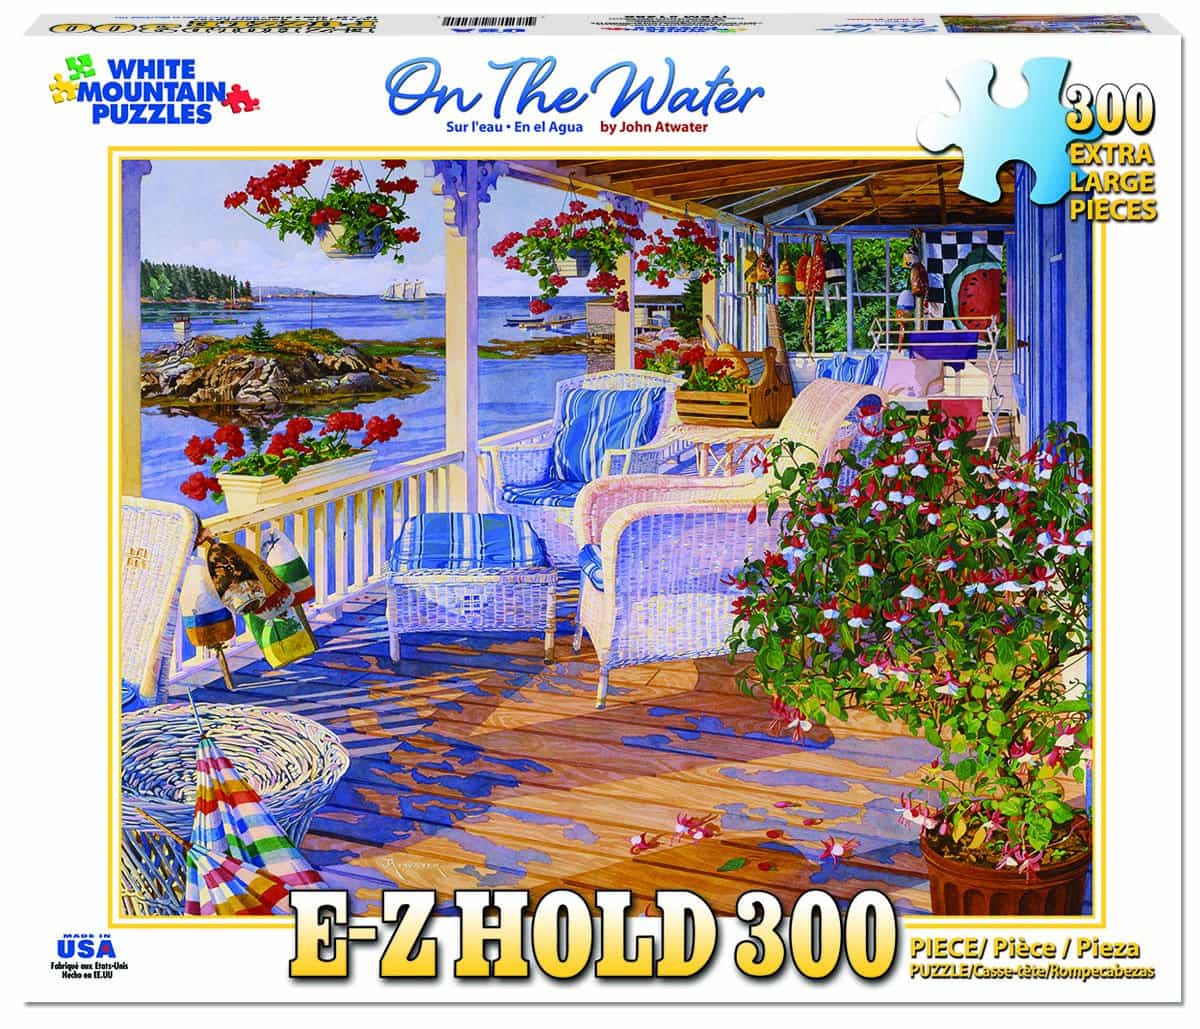 On The Water (1286pz) - 300 Piece Jigsaw Puzzle